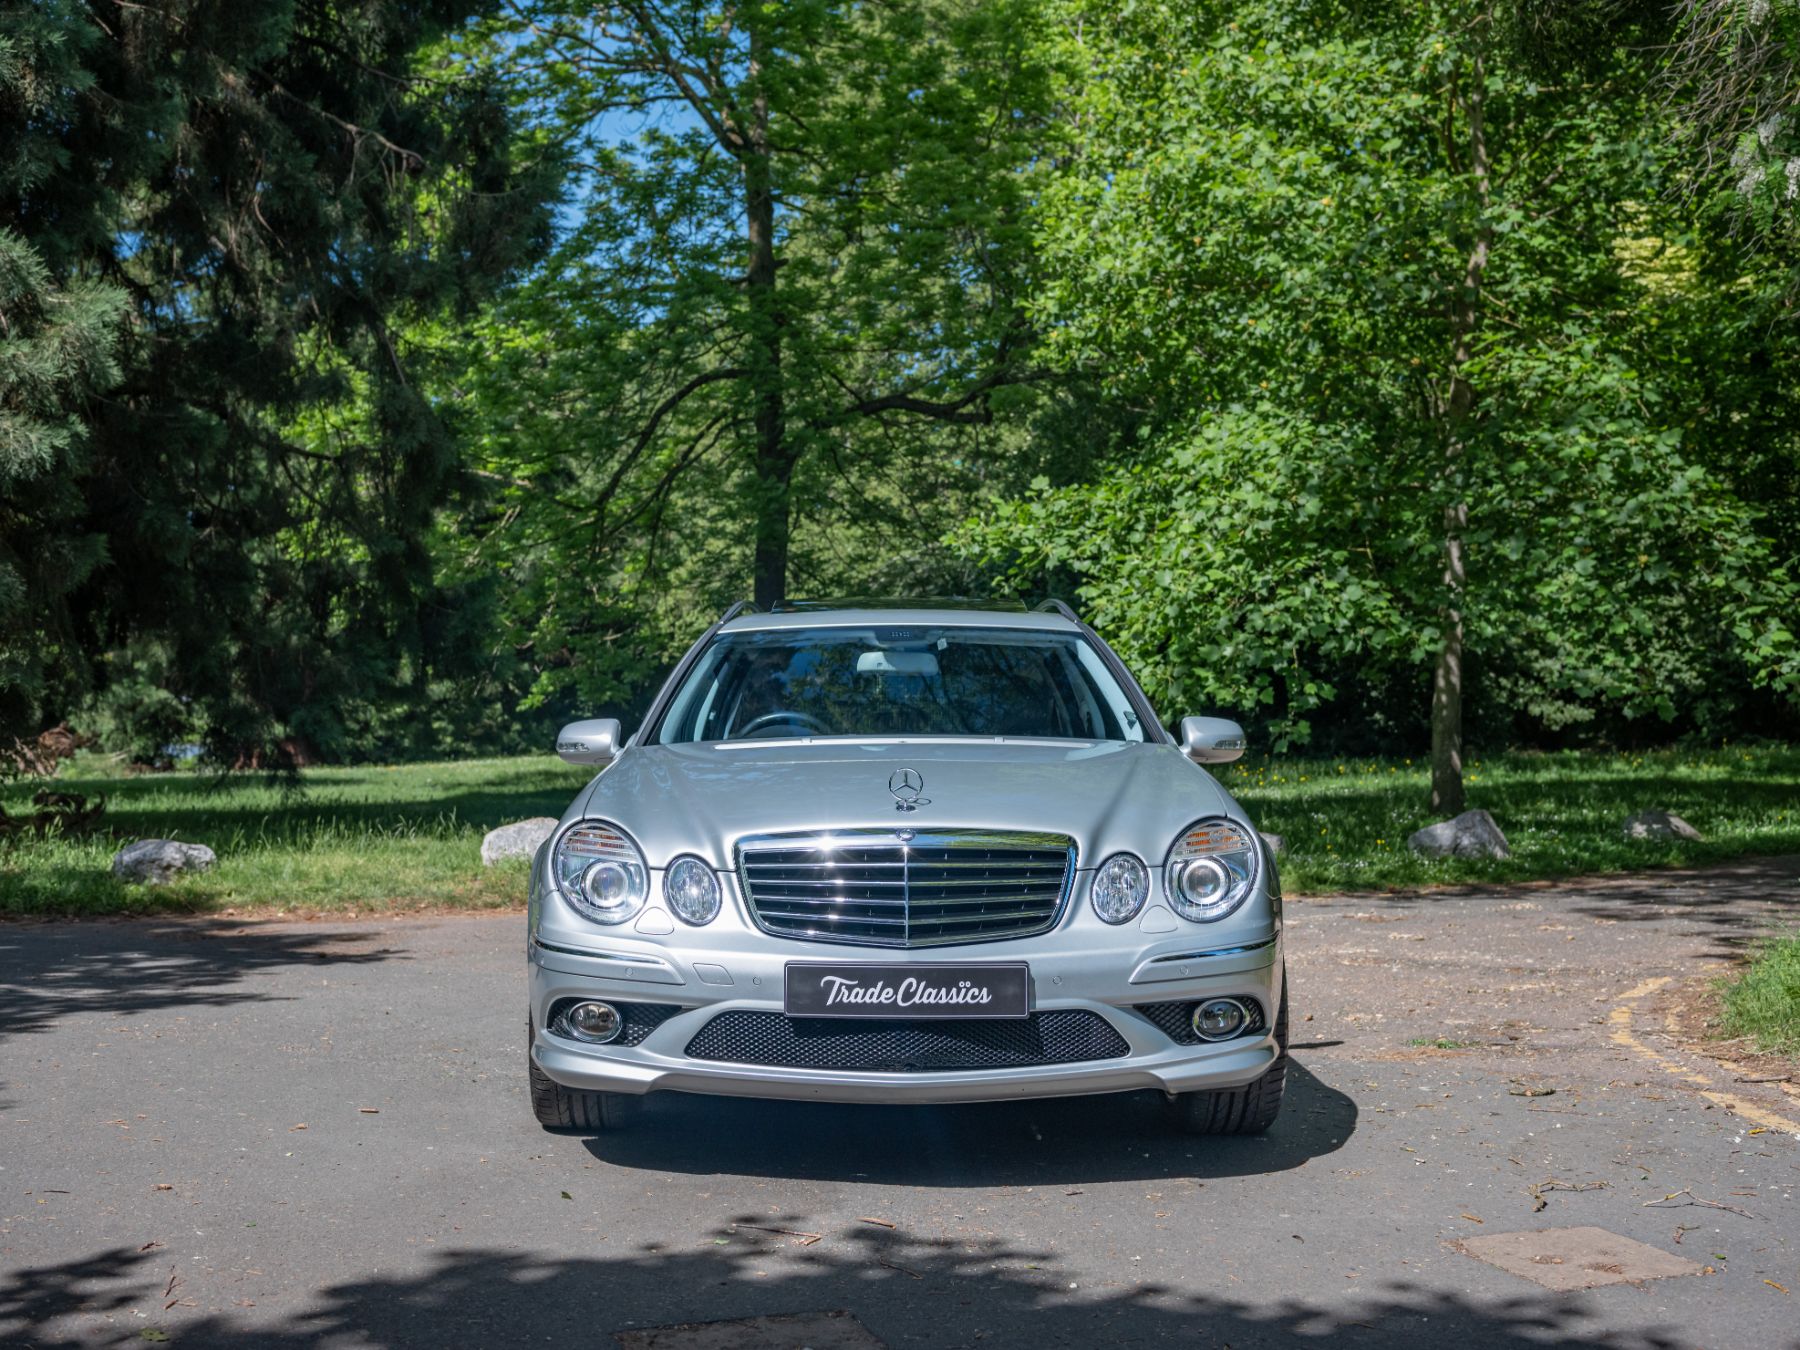 Mercedes-Benz E-Class W 211 Classic Cars for Sale - Classic Trader